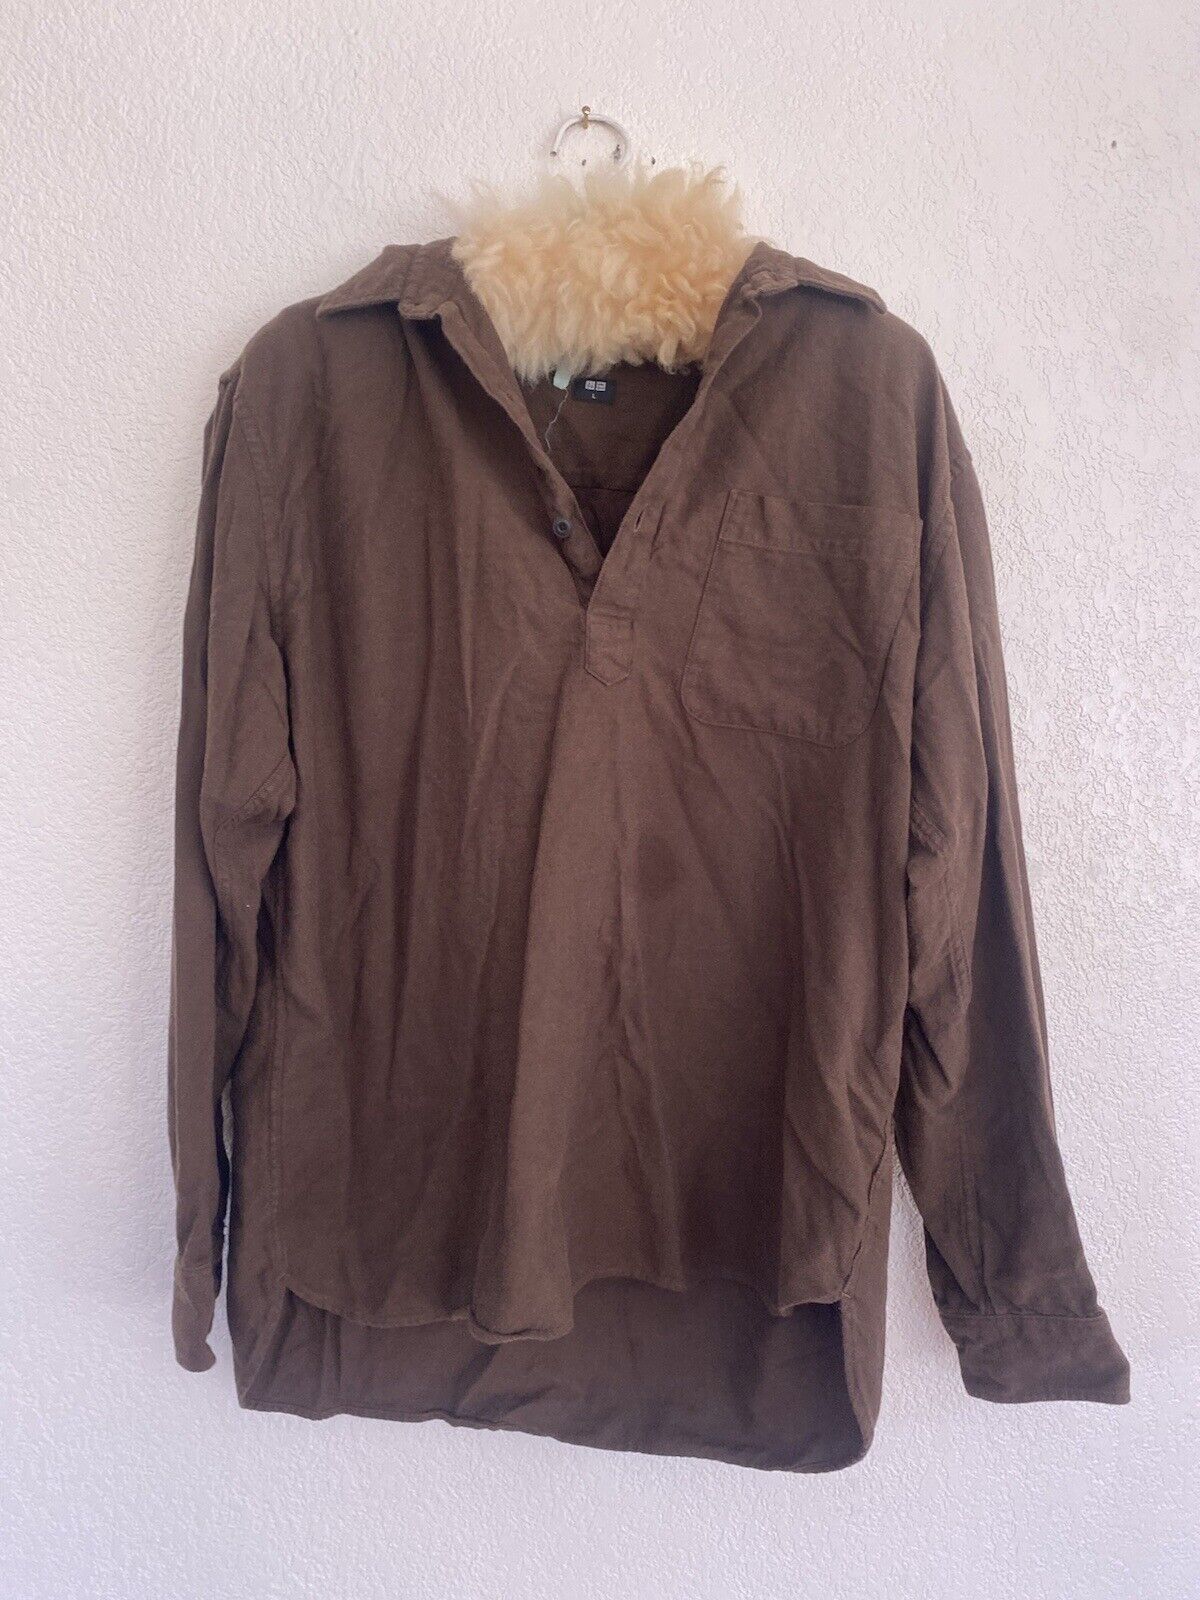 Brown Long Sleeve Polo Shirt - Uniqlo - Size Large